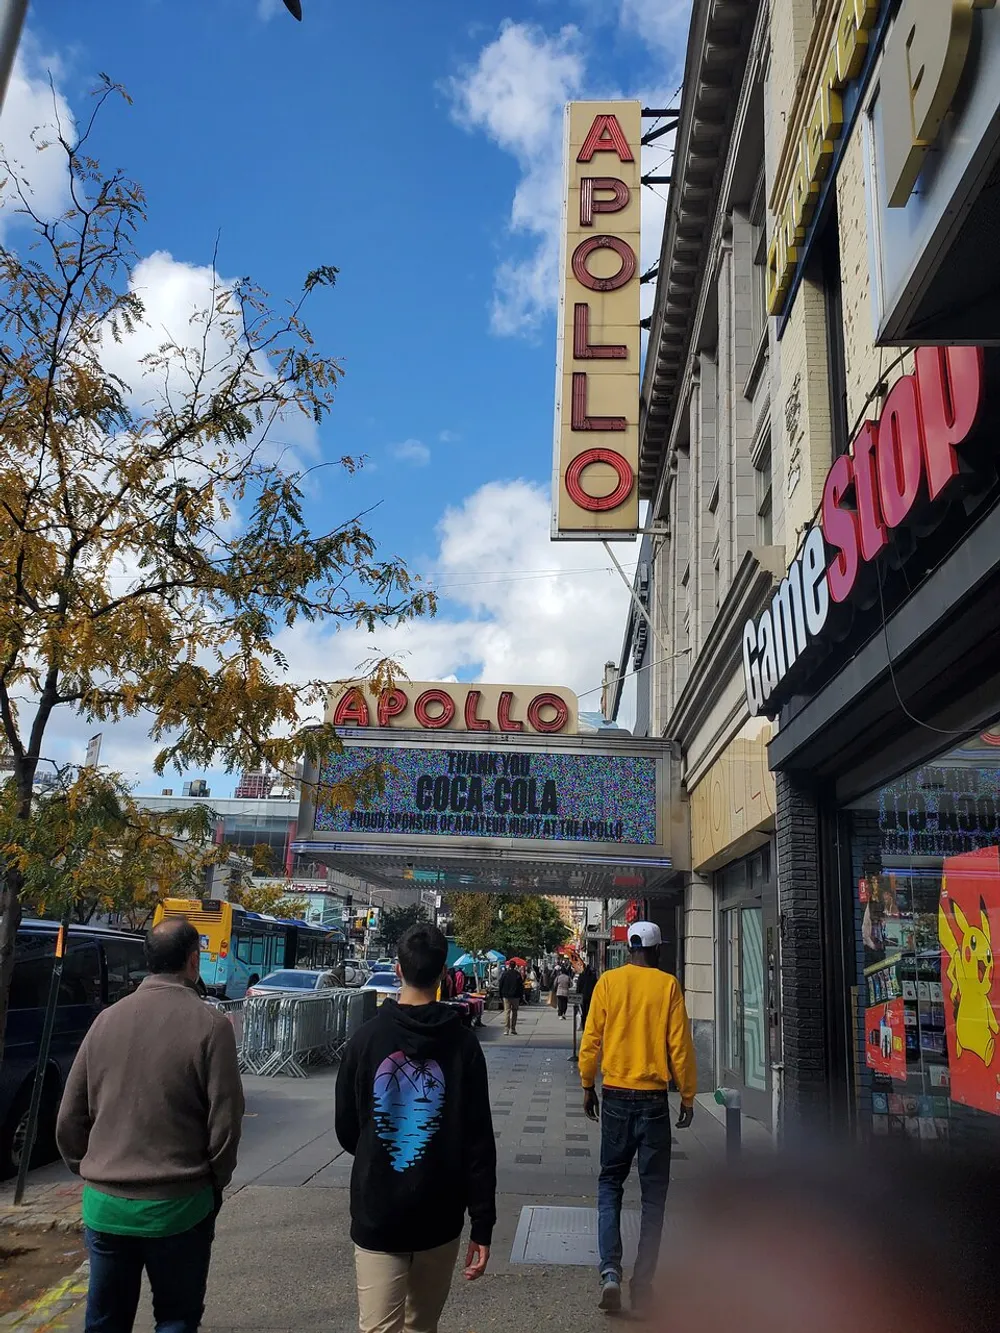 The image shows pedestrians walking past the iconic Apollo Theater with its prominent signage under a partly cloudy sky